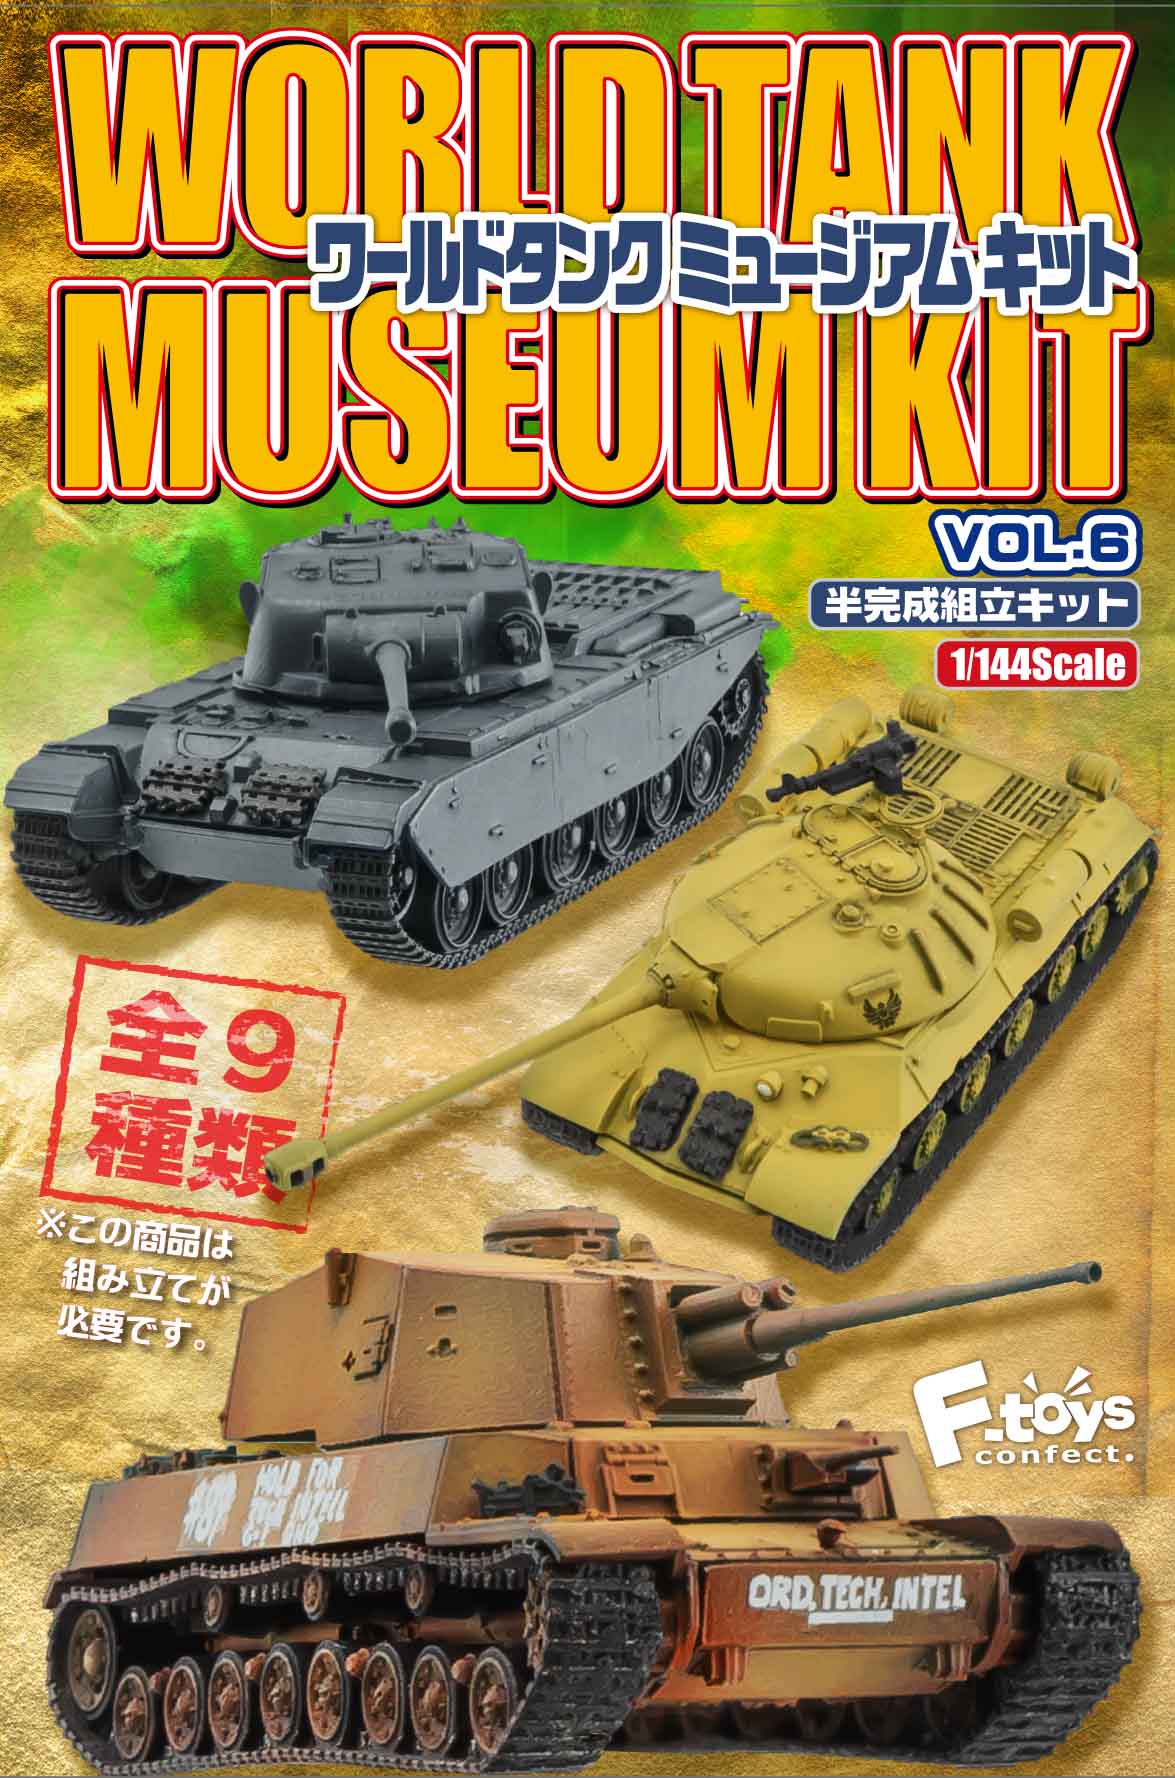 F-toys confect WORLD TANK MUSEUM KIT６